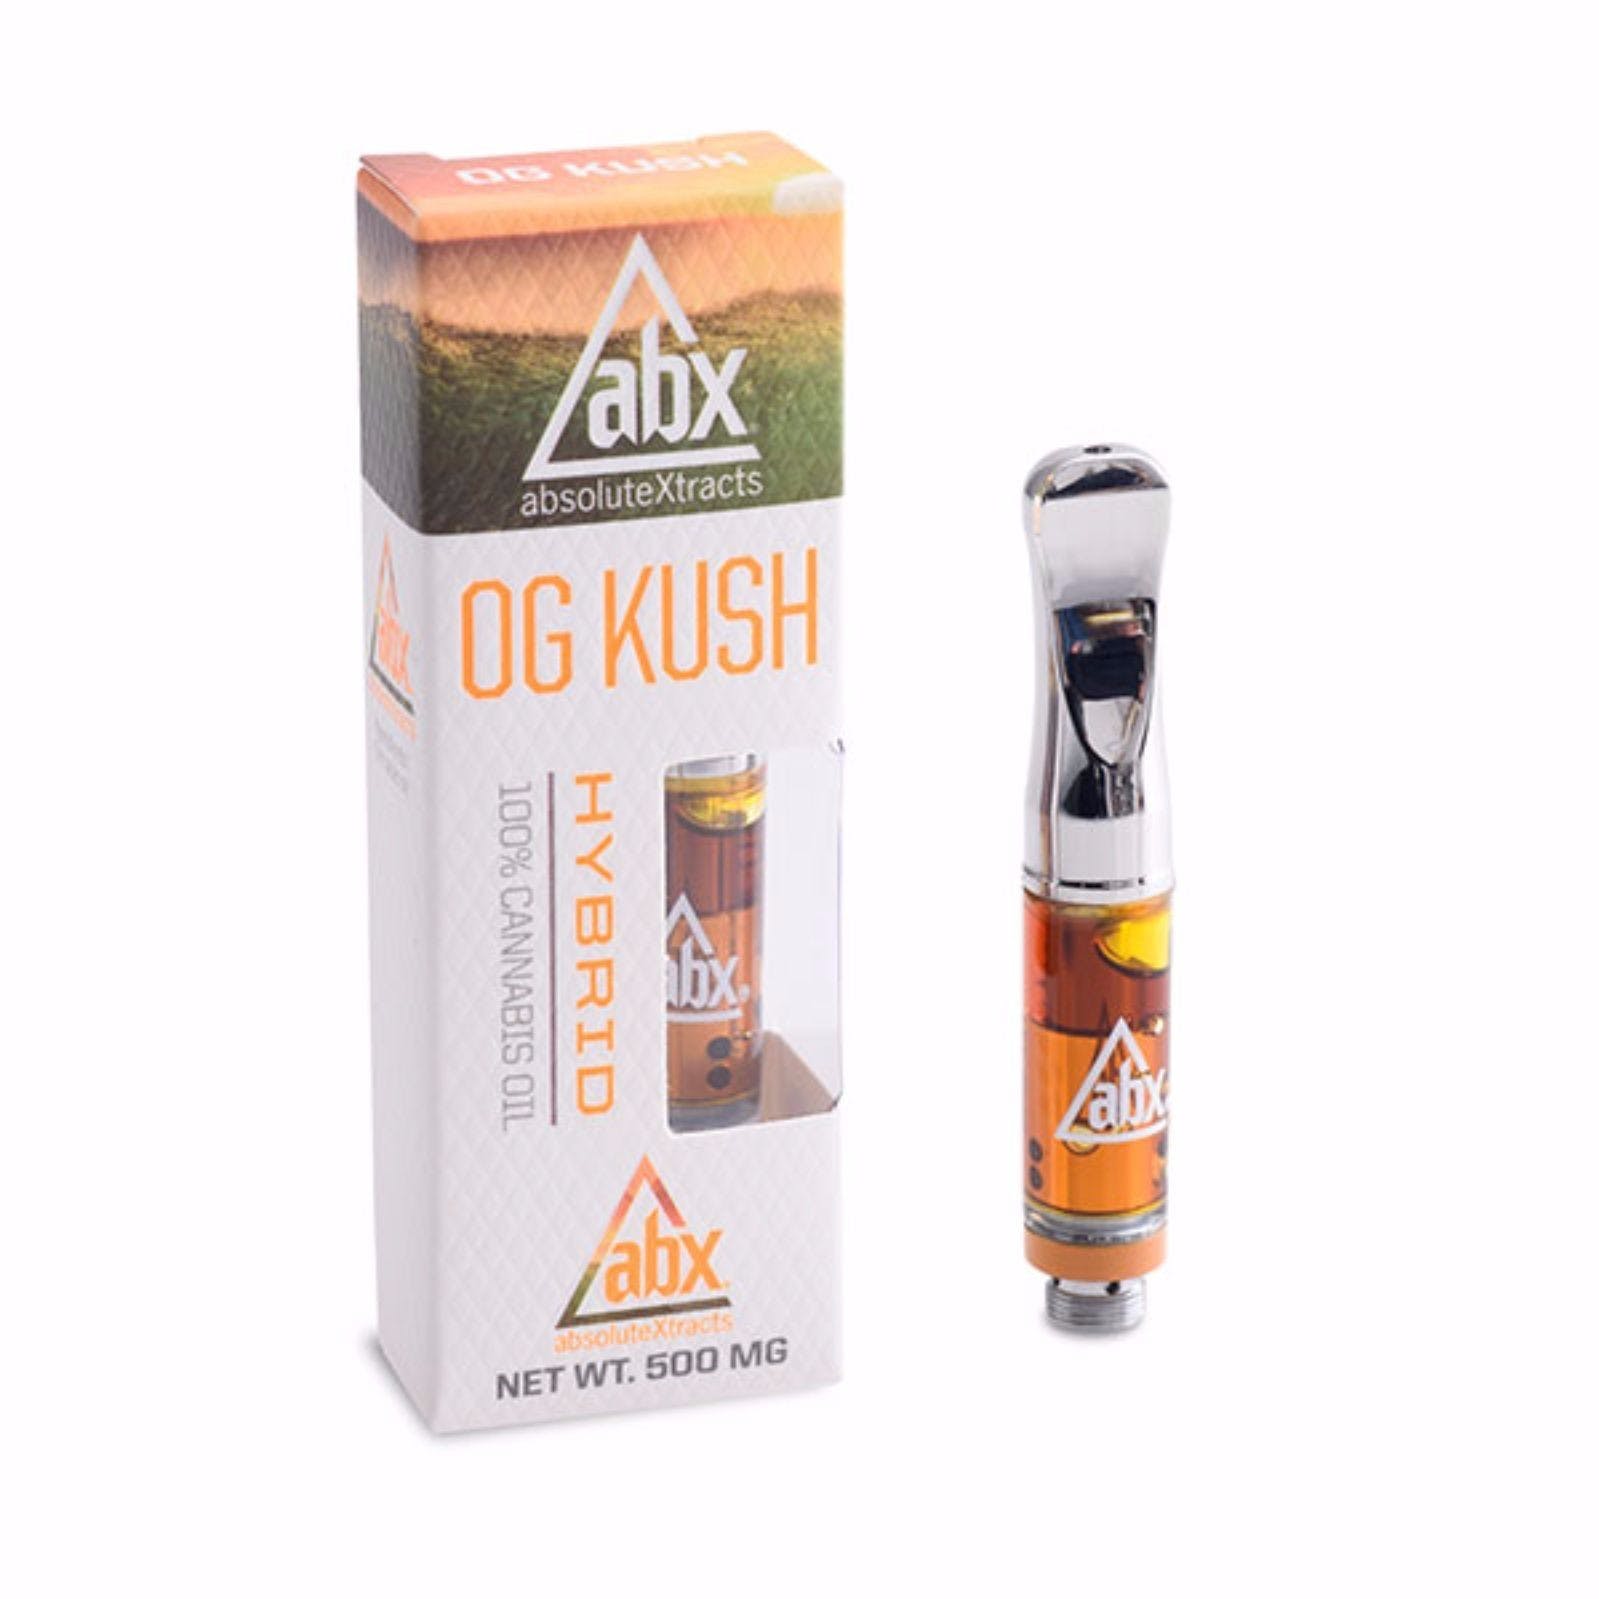 concentrate-absolutextracts-absolutextracts-og-kush-500mg